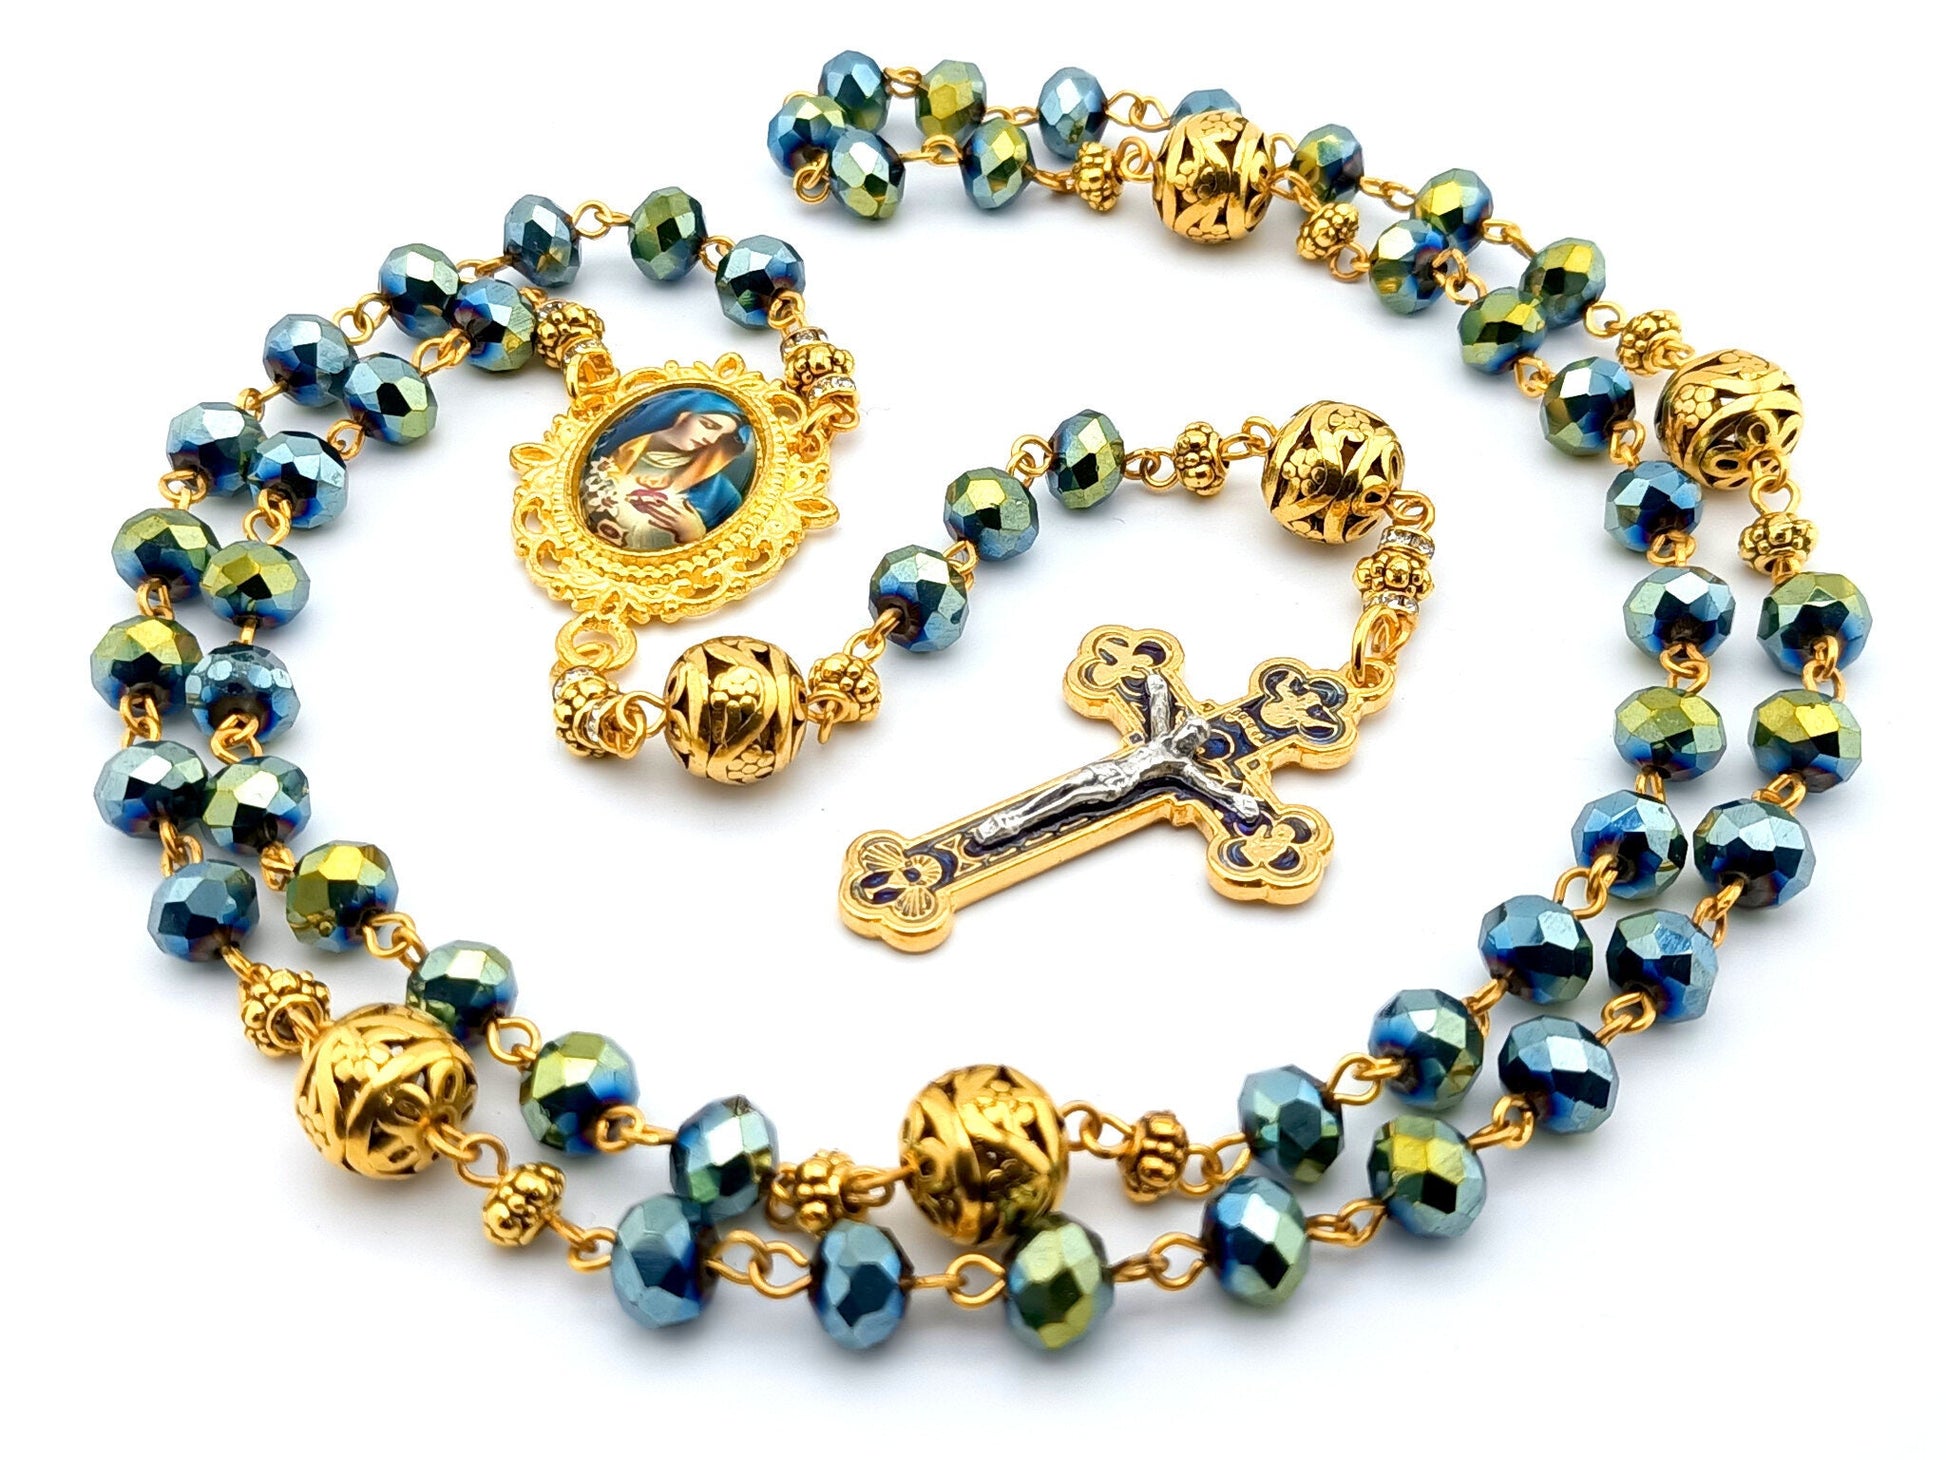 Our Lady of Sorrows unique rosary beads with faceted blue glass and golden beads, golden crucifix and picture centre medal.